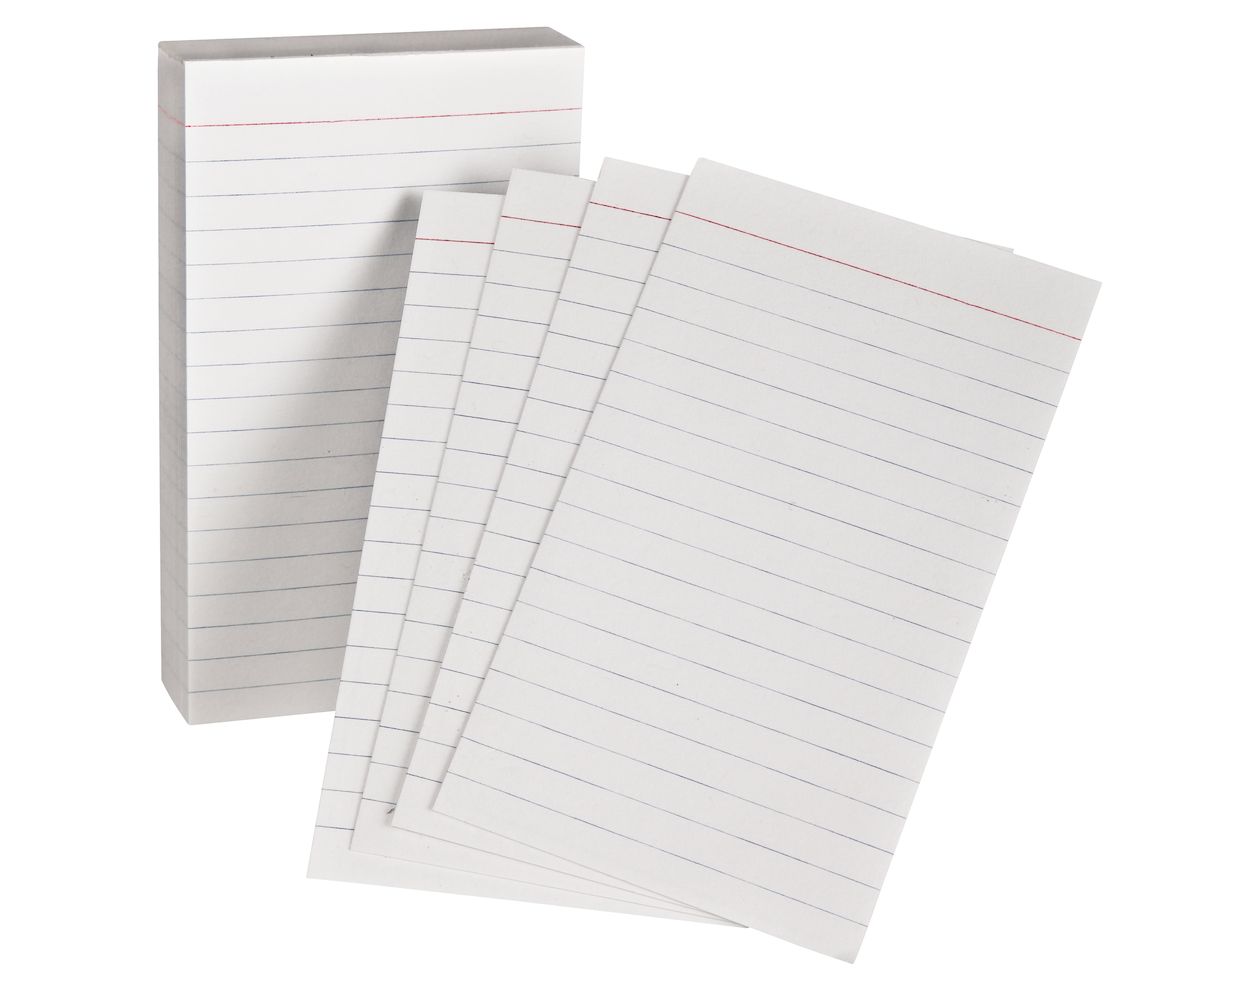 Oxford Padded Memo Index Cards, White, 5 x 3, 100 per pack